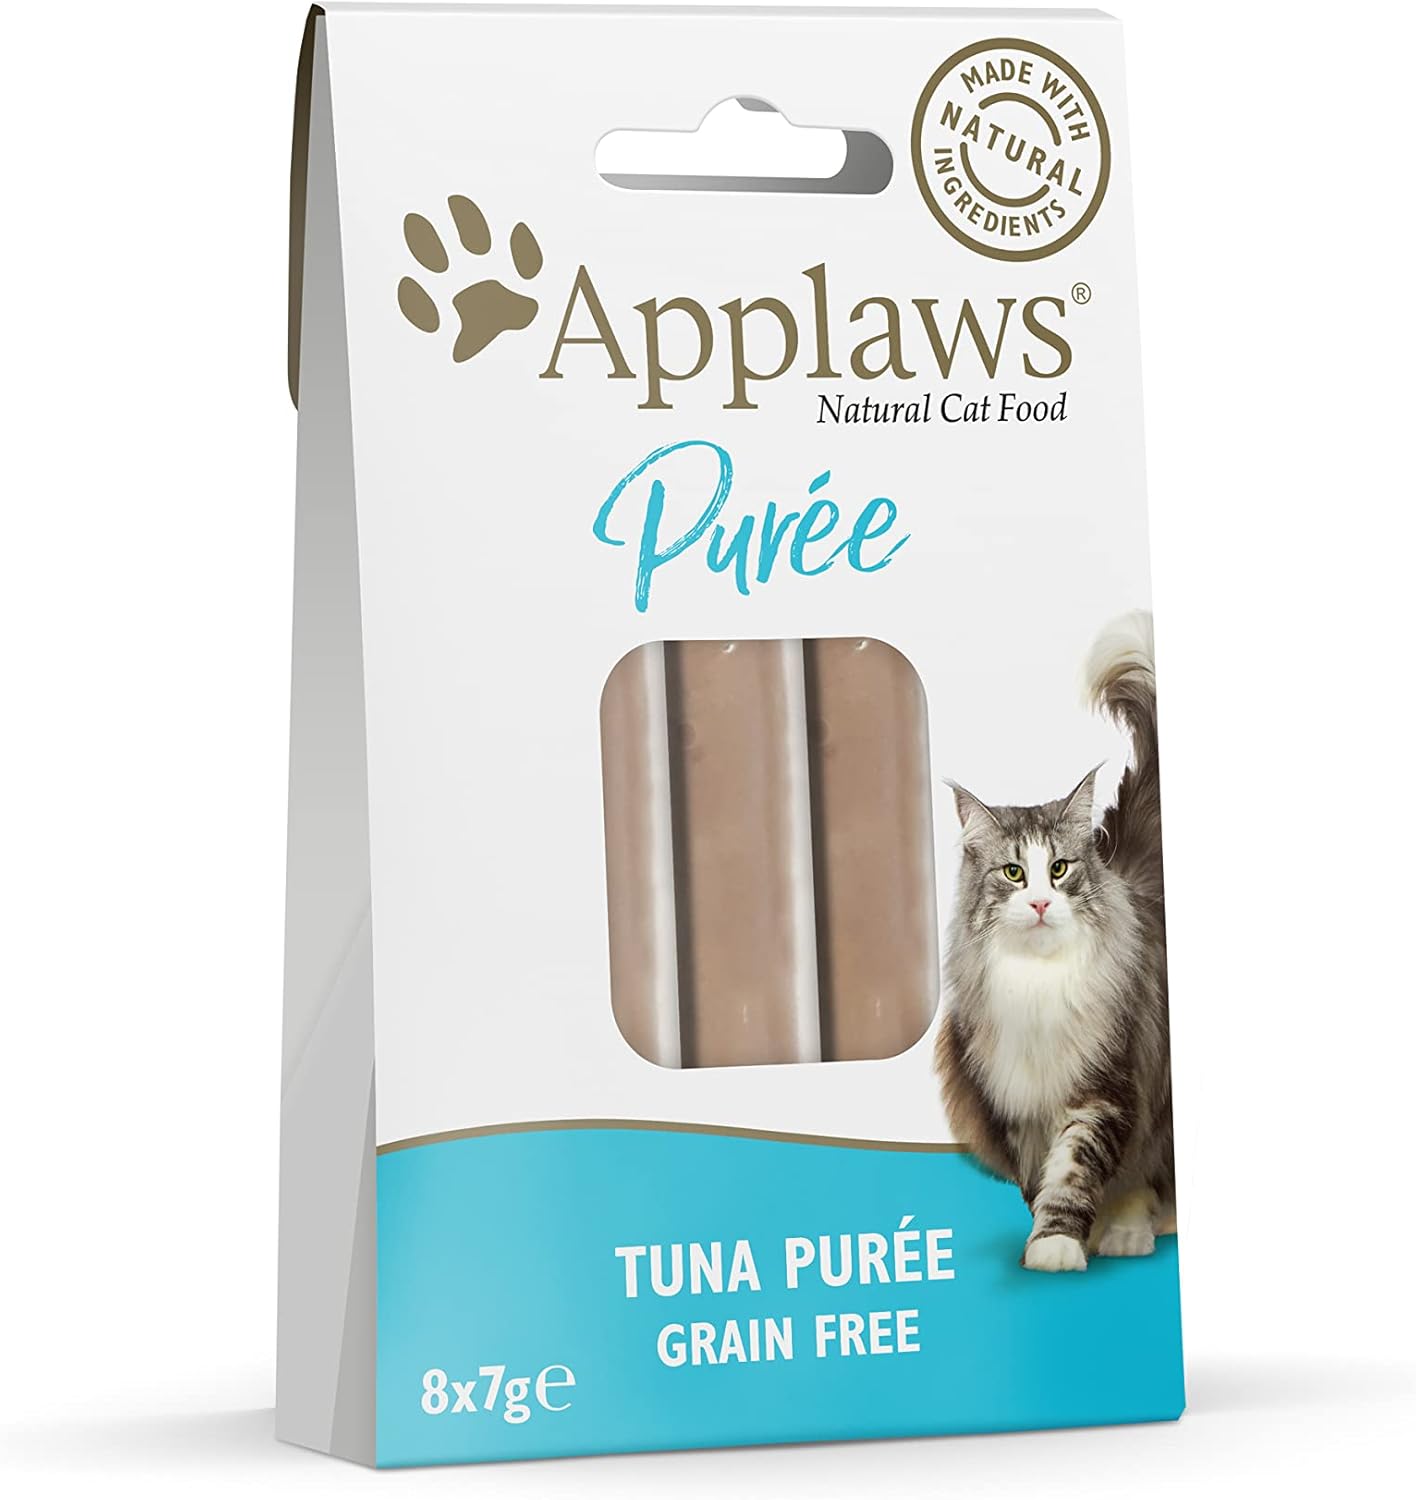 Applaws Natural Grain Free Cat Treat, Chicken Puree Sachet, Each Pack Contains 8x 7g (Pack of 10) Total 80 Sachet?9562ML-A